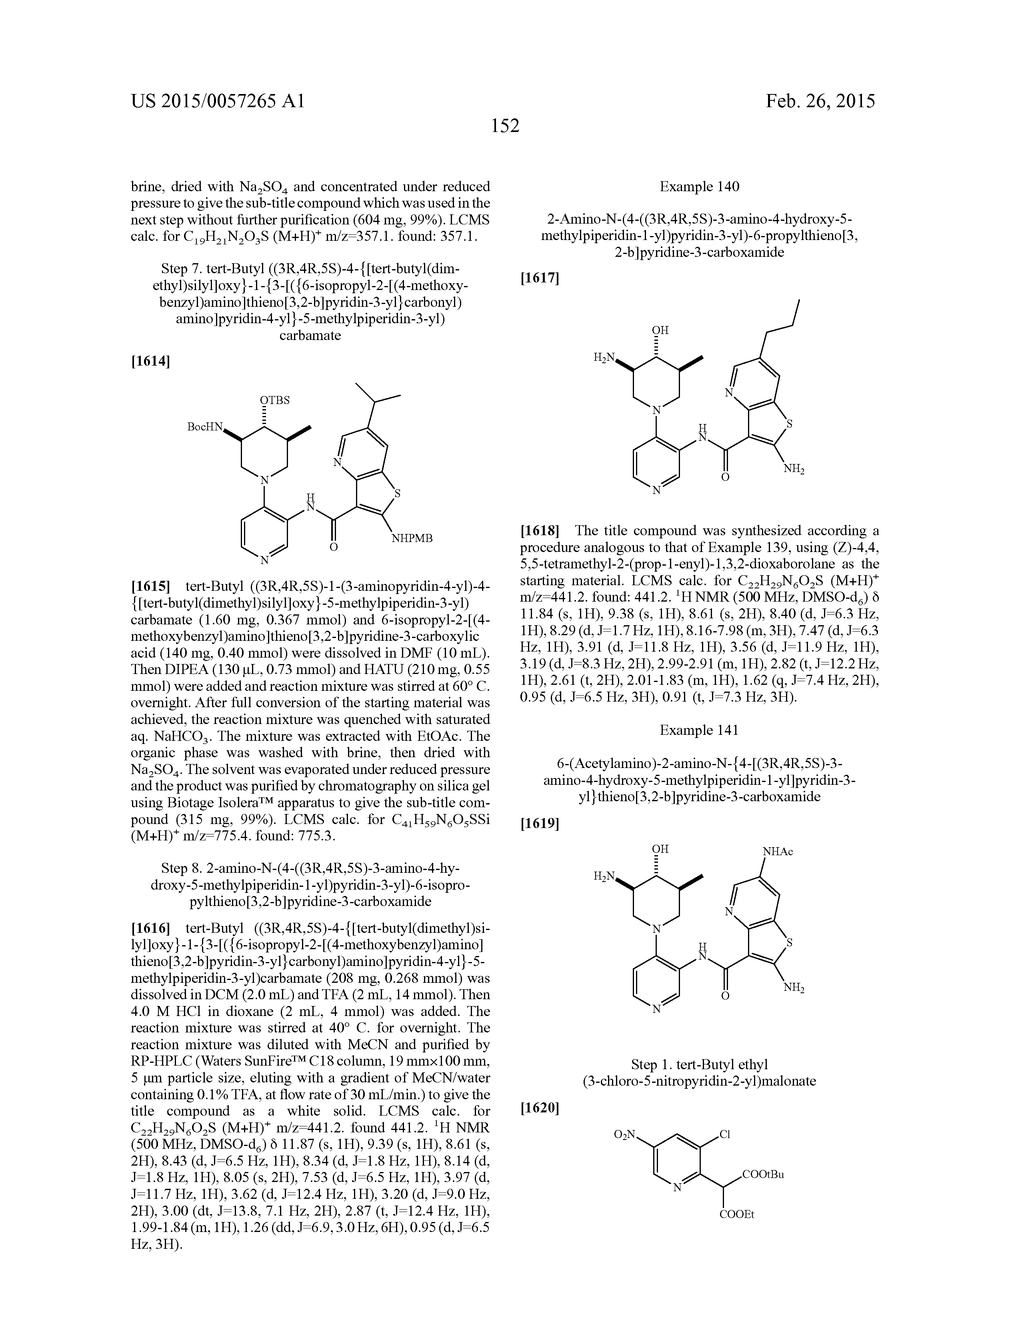 FURO- AND THIENO-PYRIDINE CARBOXAMIDE COMPOUNDS USEFUL AS PIM KINASE     INHIBITORS - diagram, schematic, and image 153